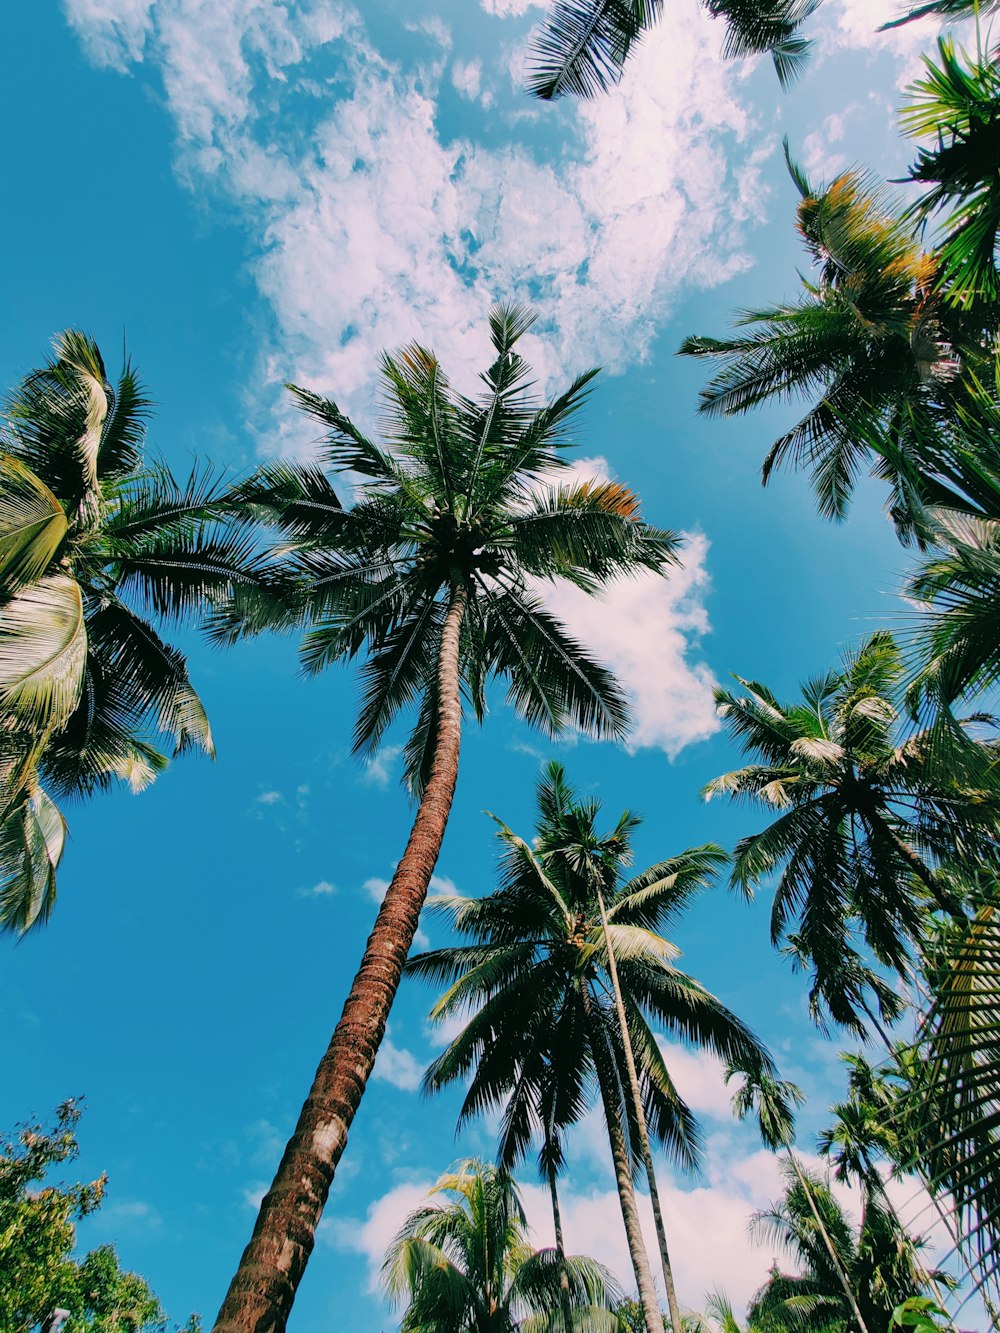 a group of palm trees with a blue sky in the background